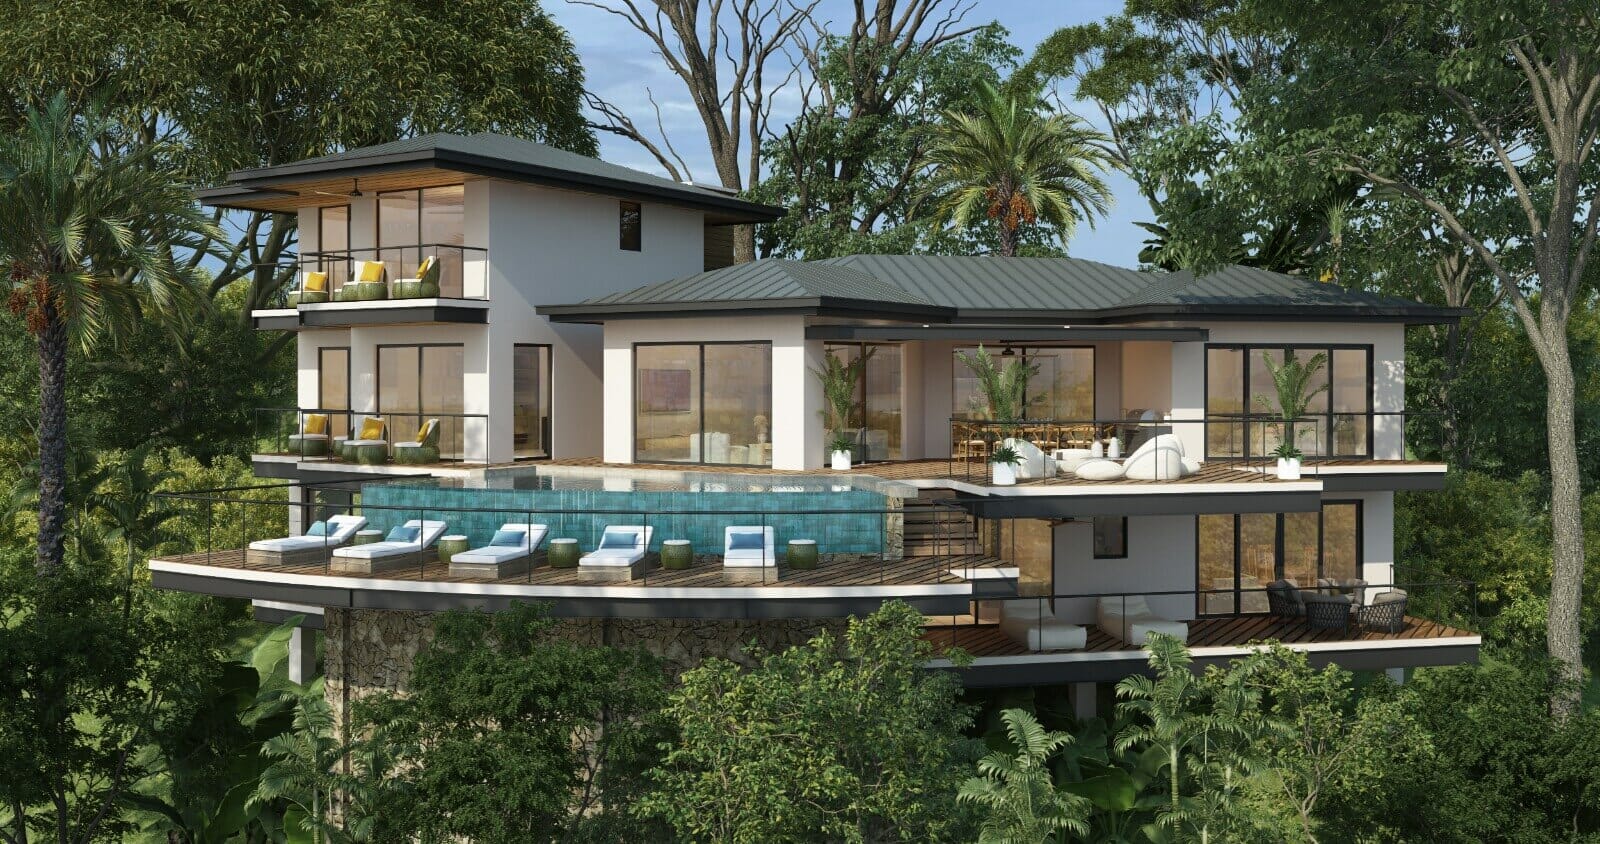 Available 7-Bedroom Homes at Tamarindo Park